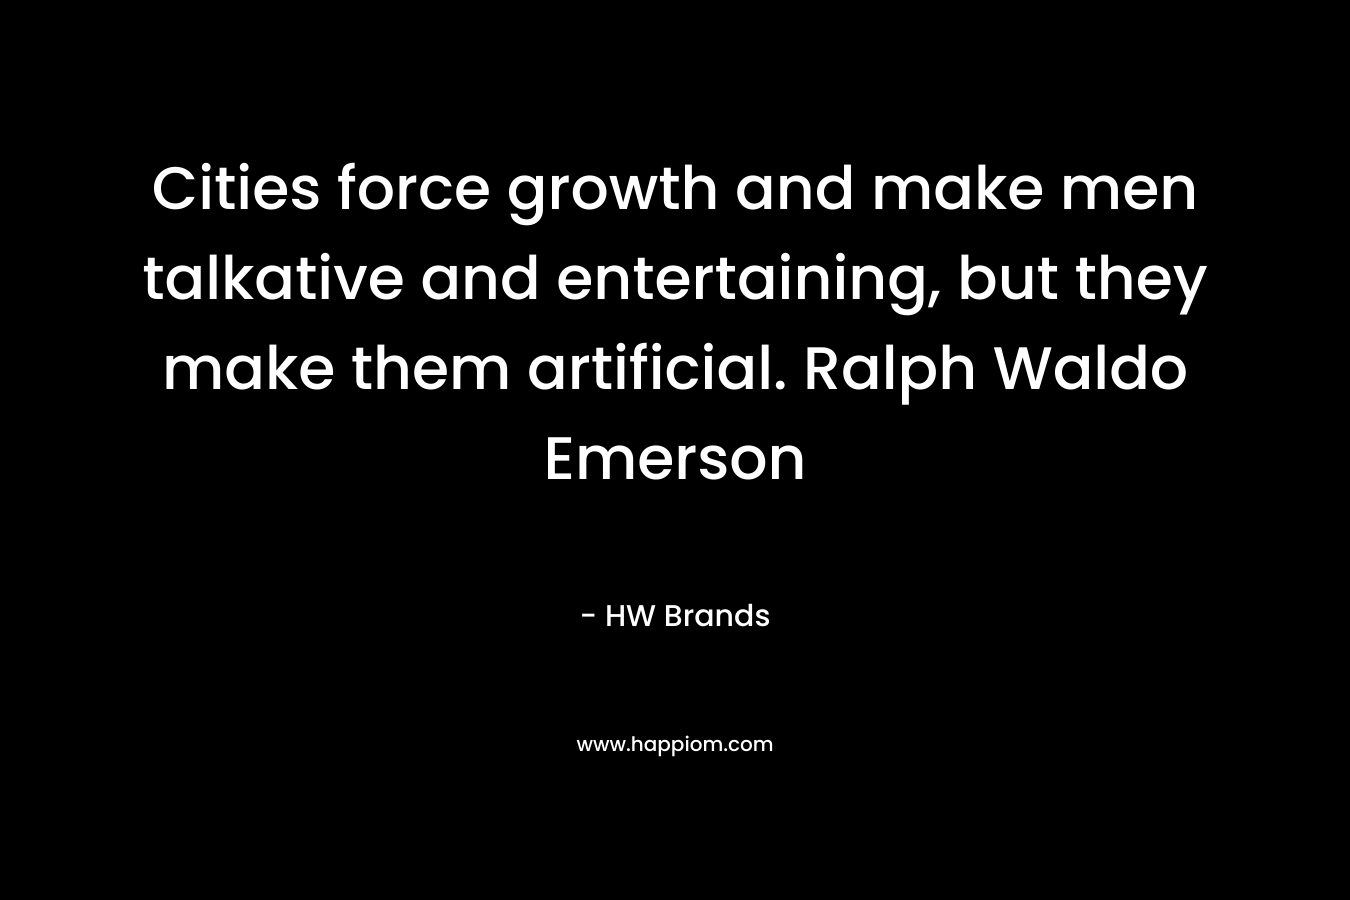 Cities force growth and make men talkative and entertaining, but they make them artificial. Ralph Waldo Emerson – HW Brands